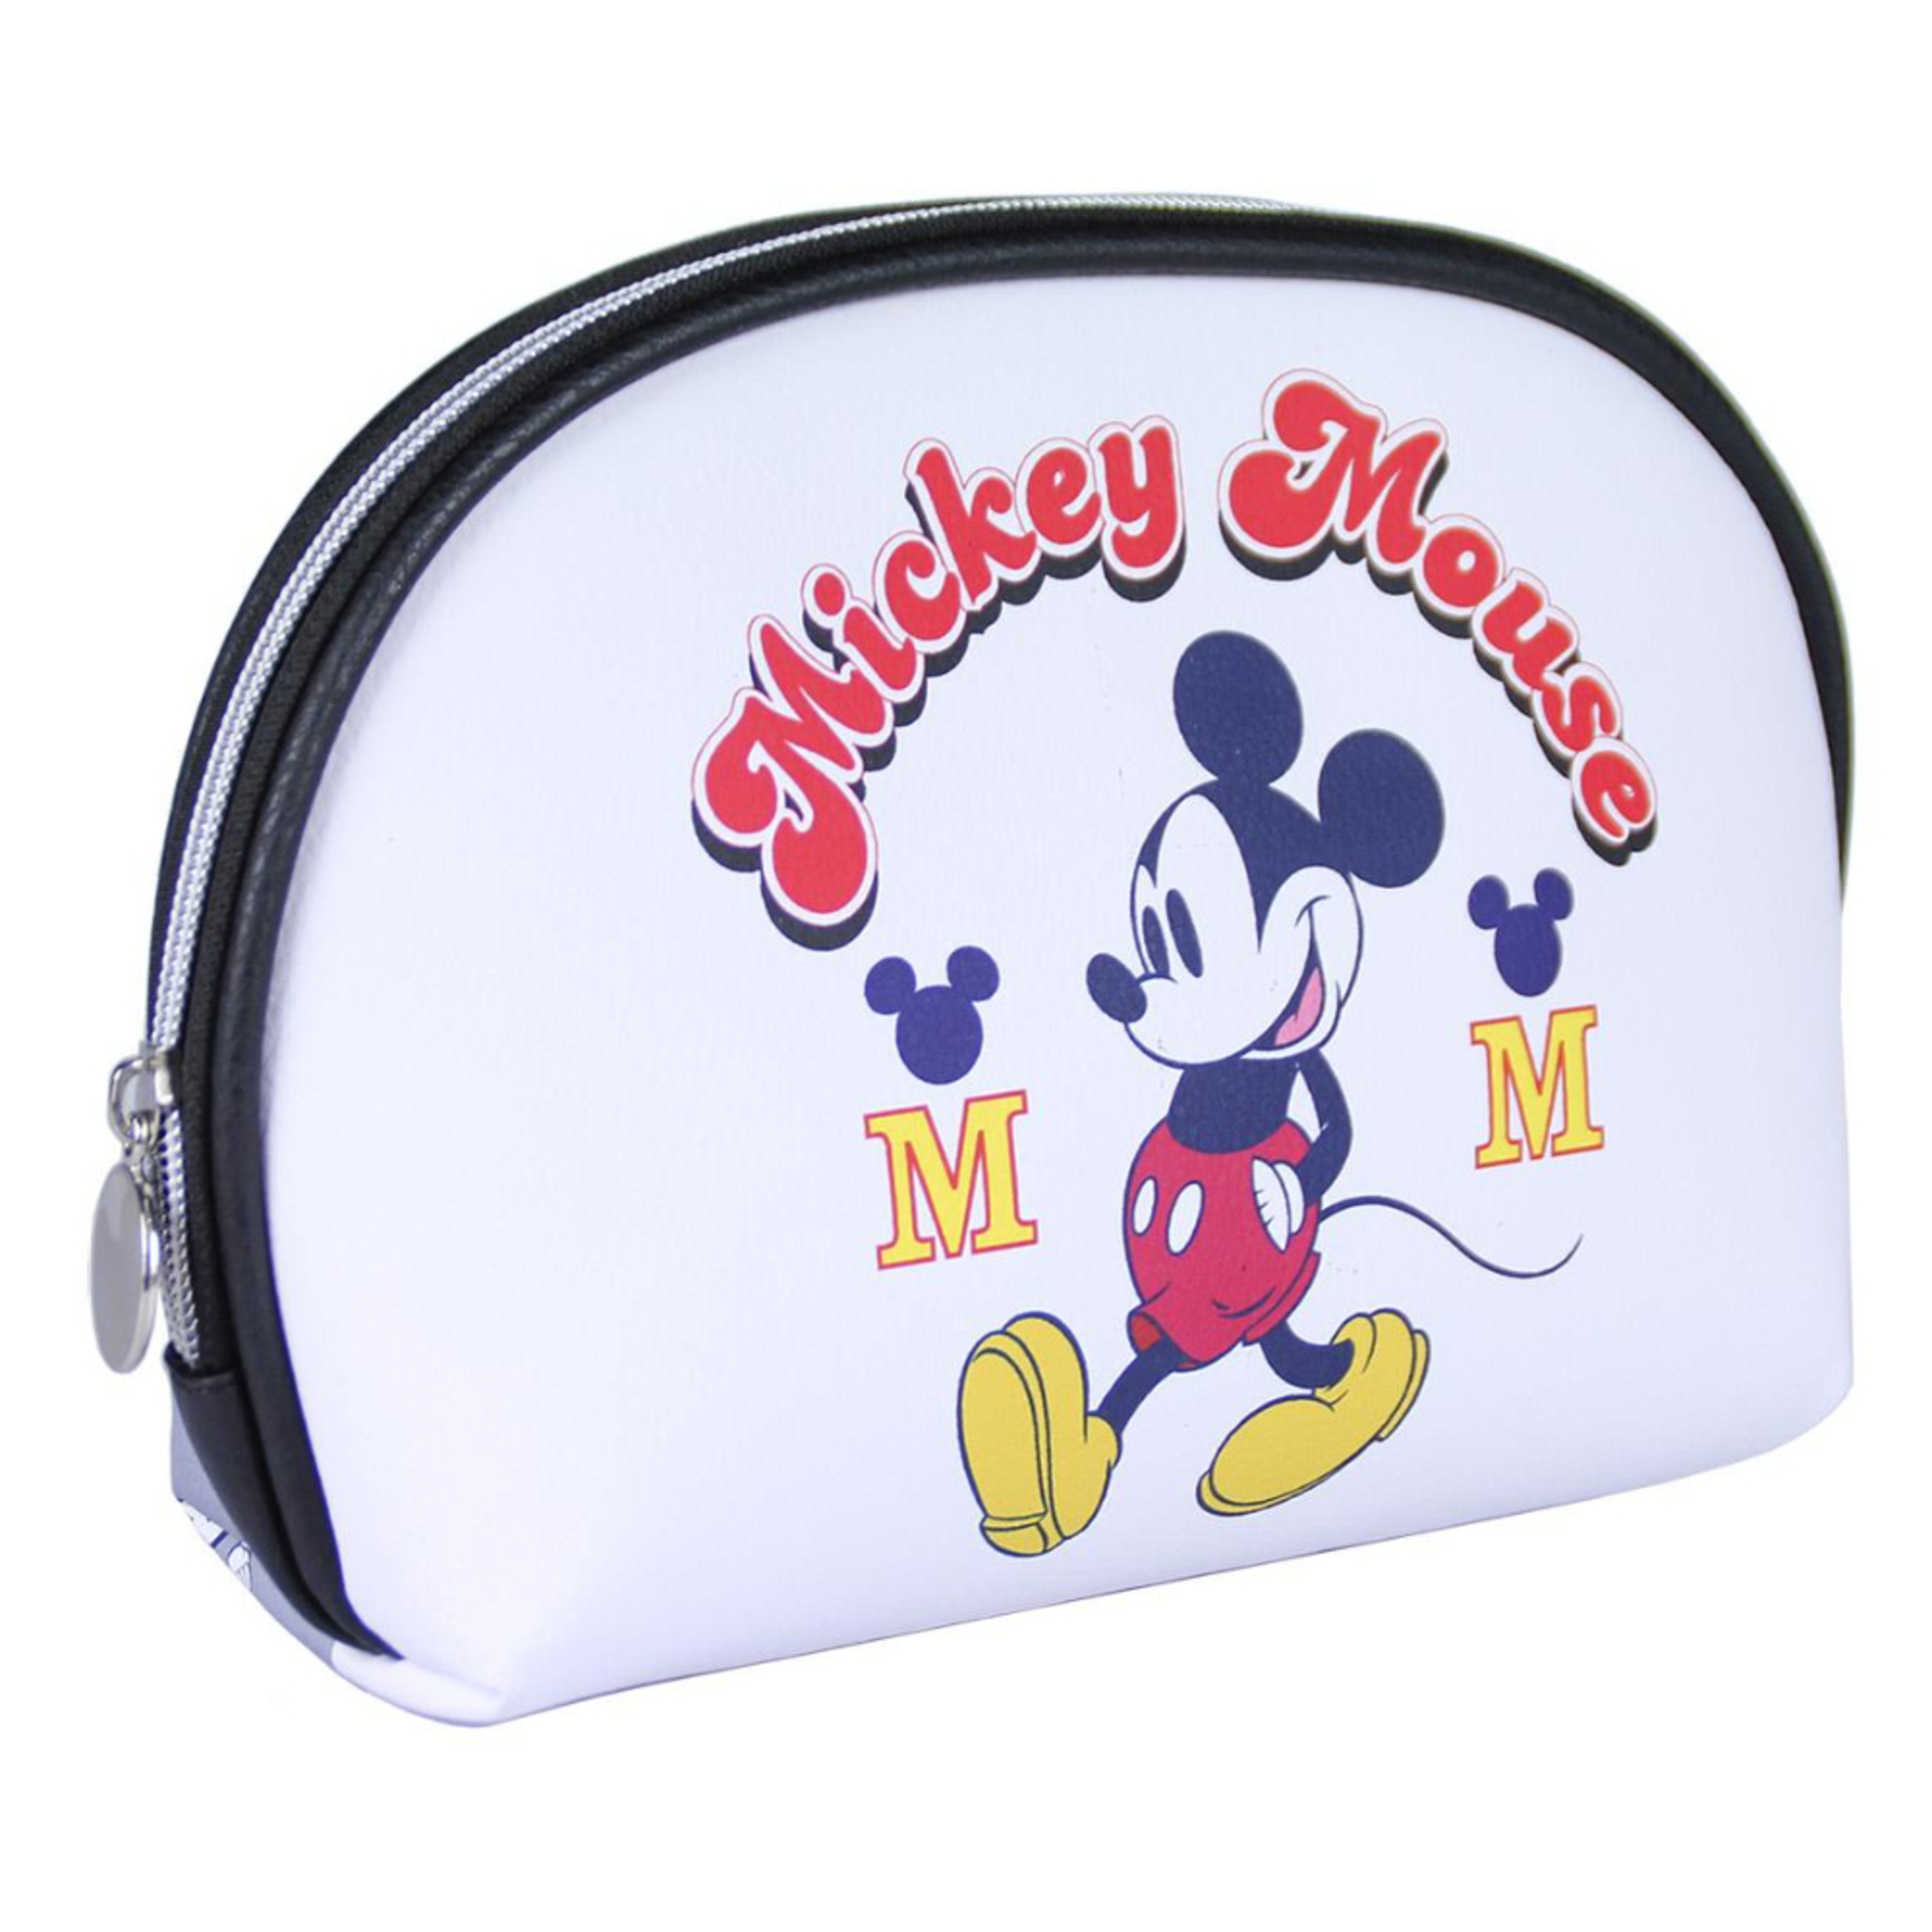 Neceser Mickey Mouse 70352 - blanco - 